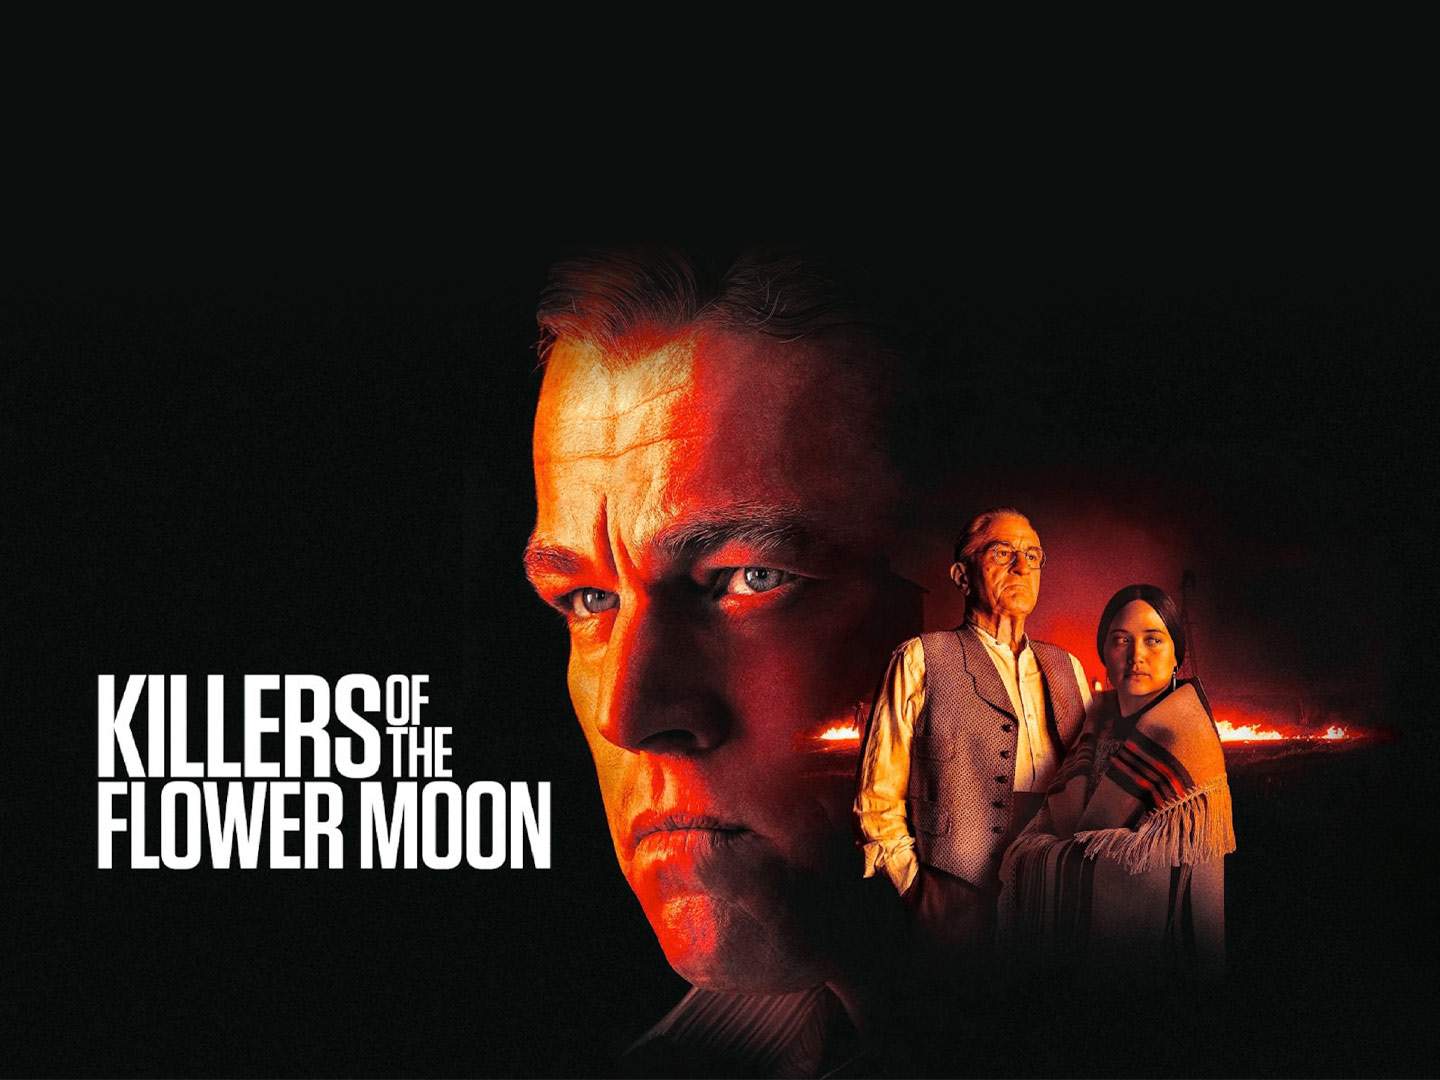 Capitol Cinema Presents: Killers of the Flower Moon